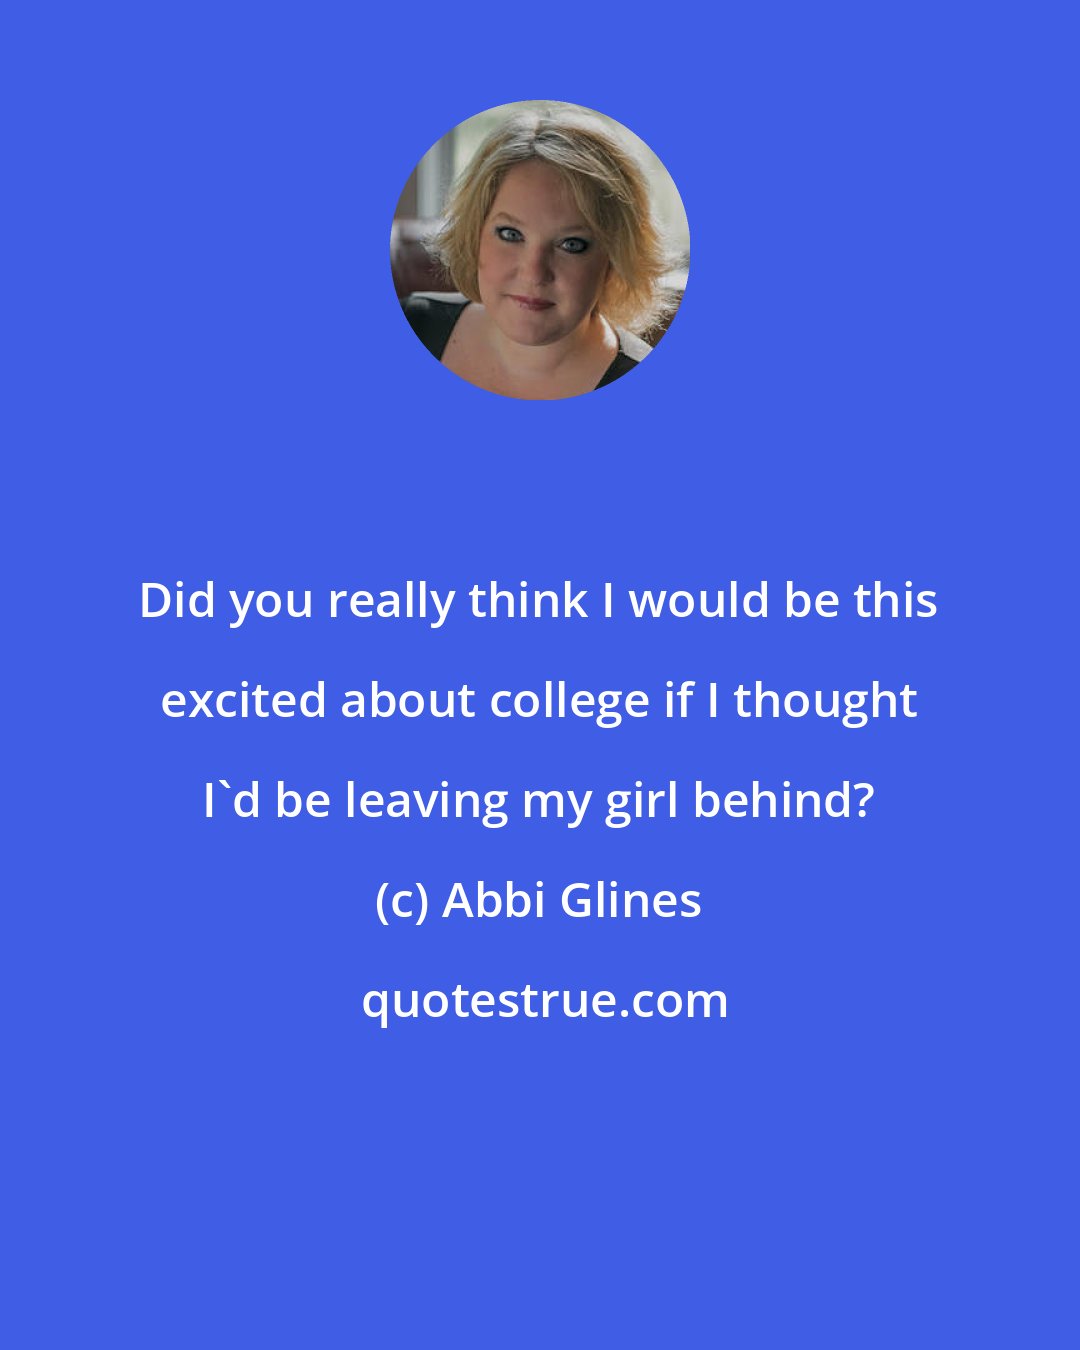 Abbi Glines: Did you really think I would be this excited about college if I thought I'd be leaving my girl behind?